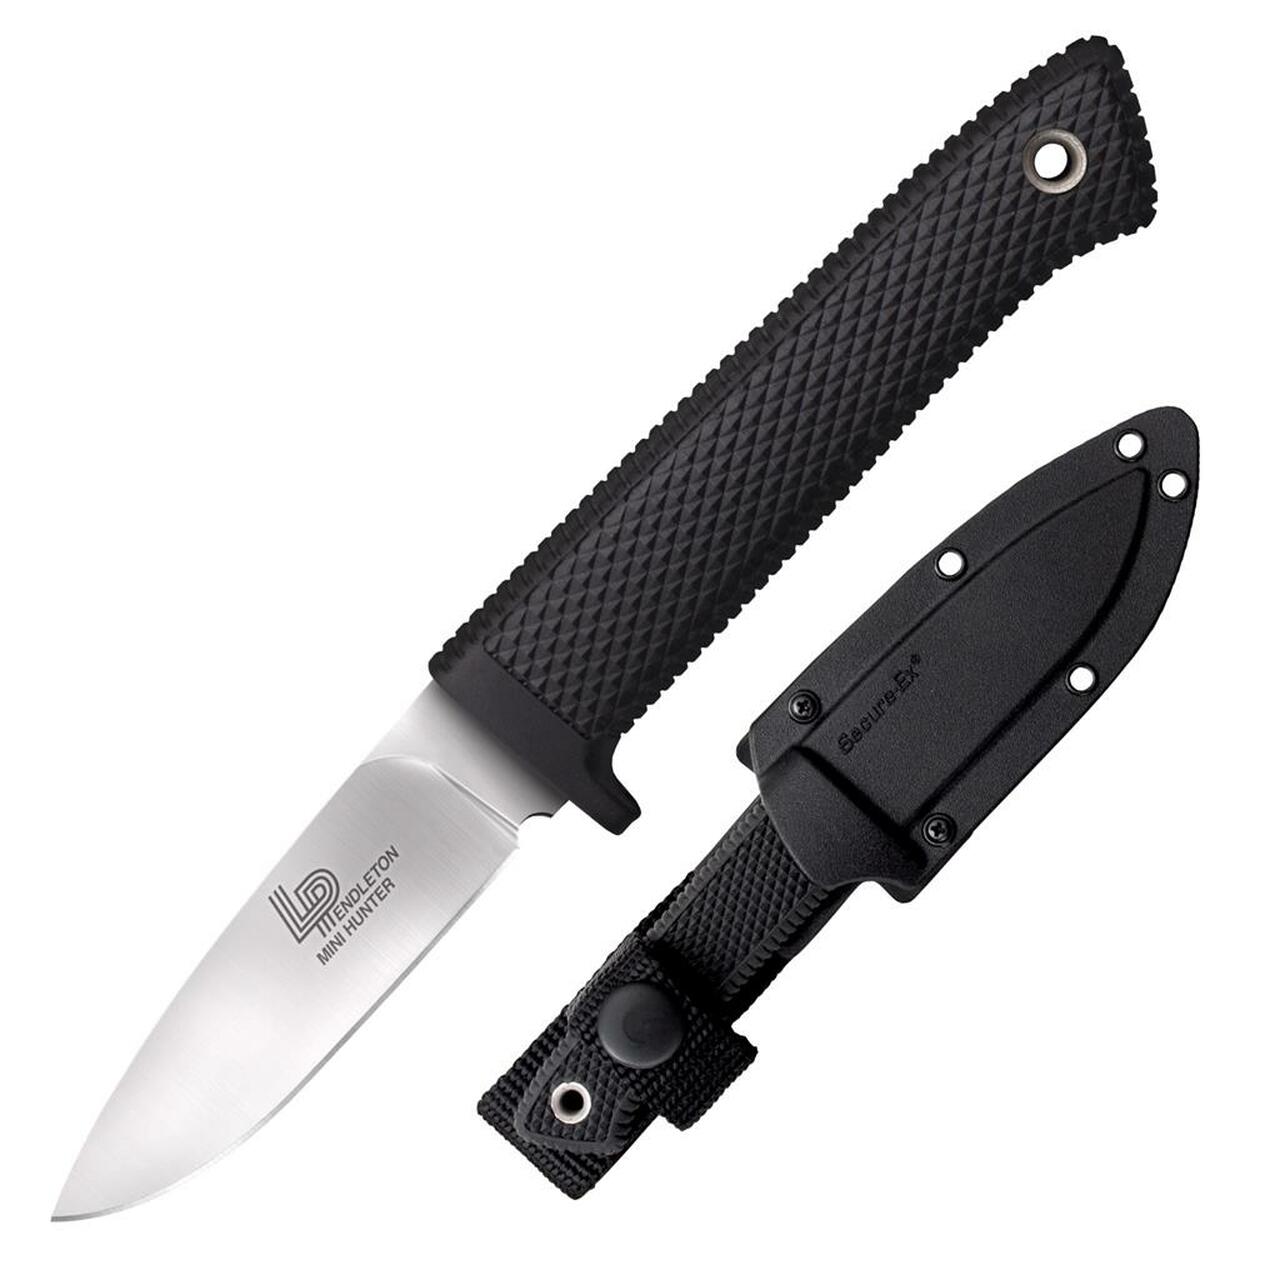 COLD STEEL Pendleton Mini Hunter Fixed Blade 36LPMF Knife AUS10A Stainless Steel Knives